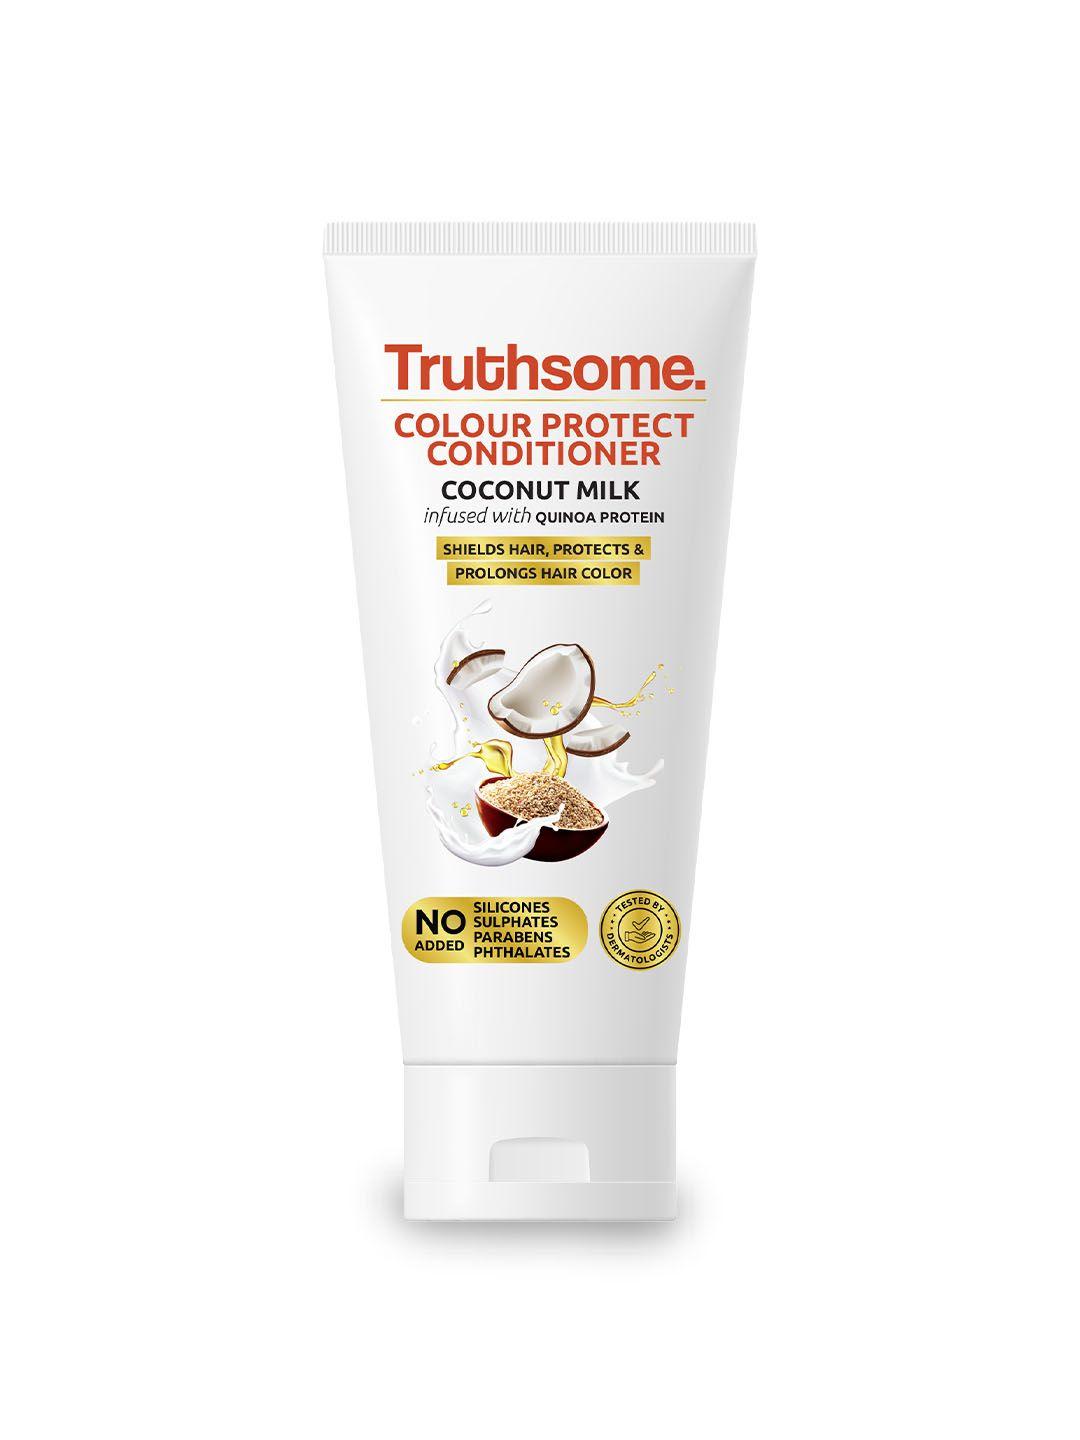 truthsome. color protect coconut milk conditioner for prolonging hair color - 150 ml